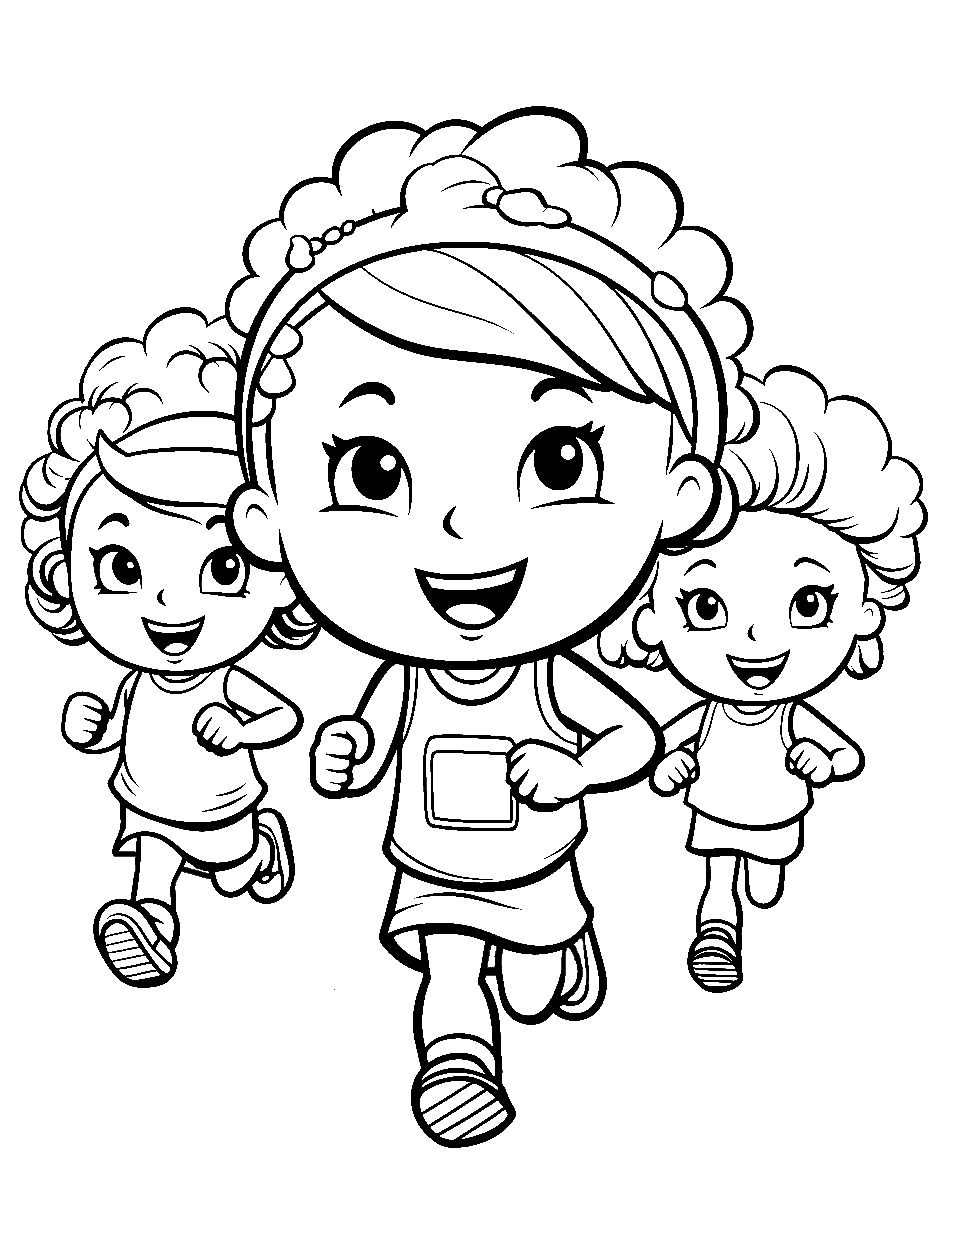 Sports Day Challenge Coloring Page - Athletic Shopkins running in a sports event.